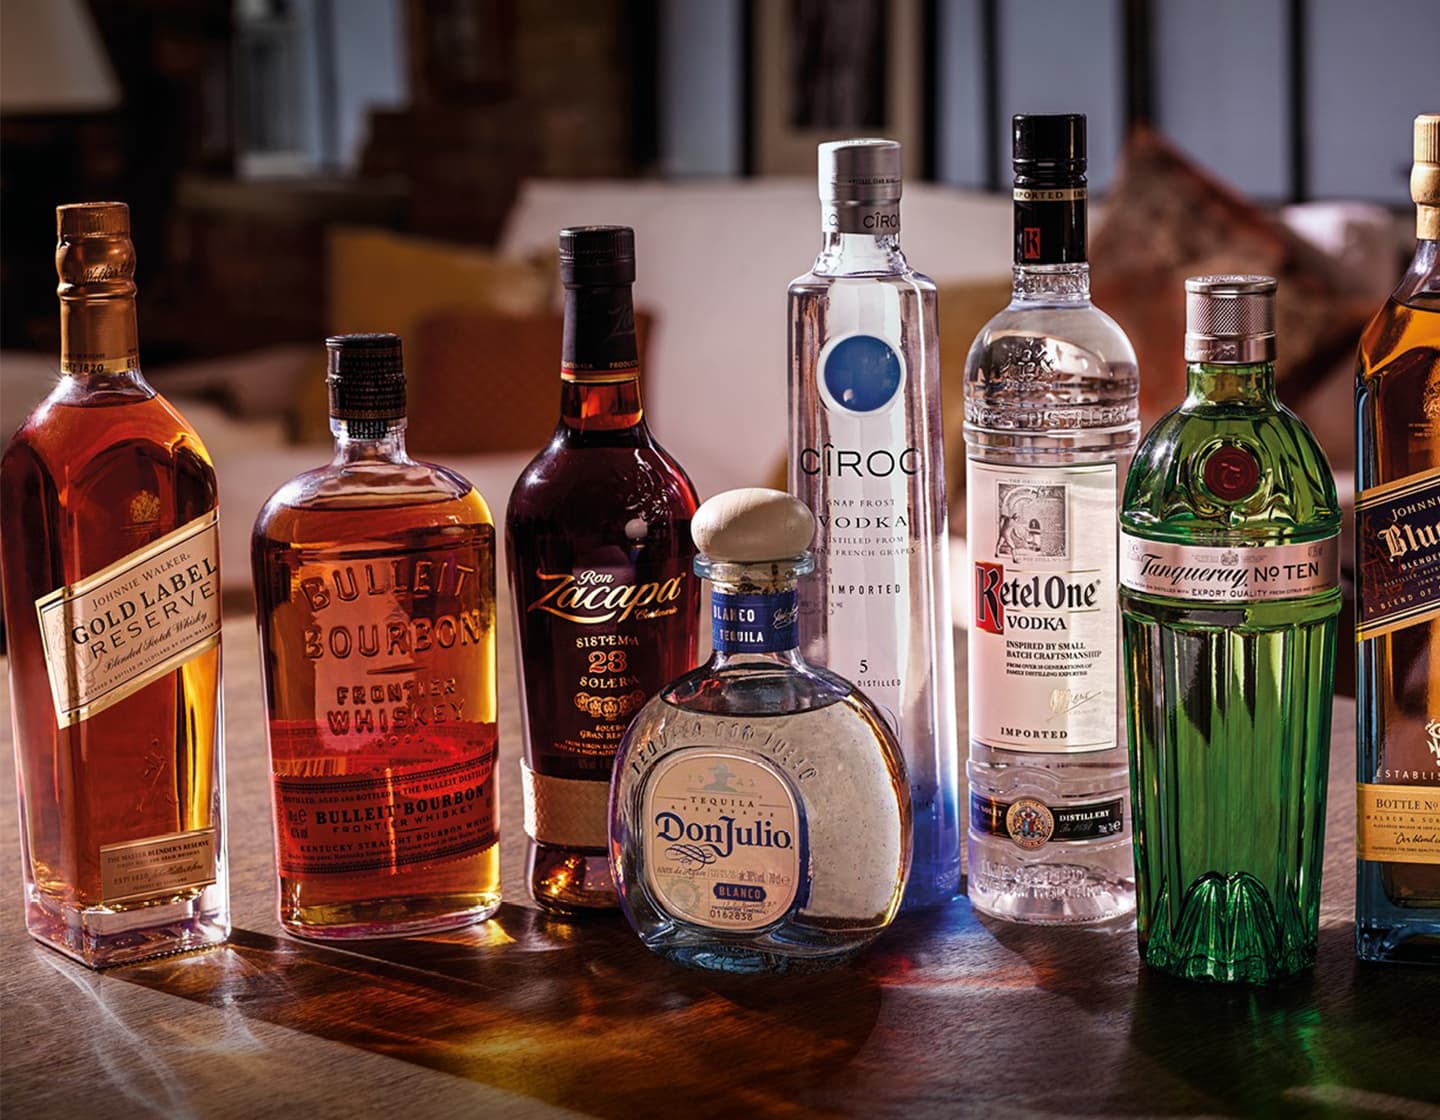 selection of Diageo owned brand bottles